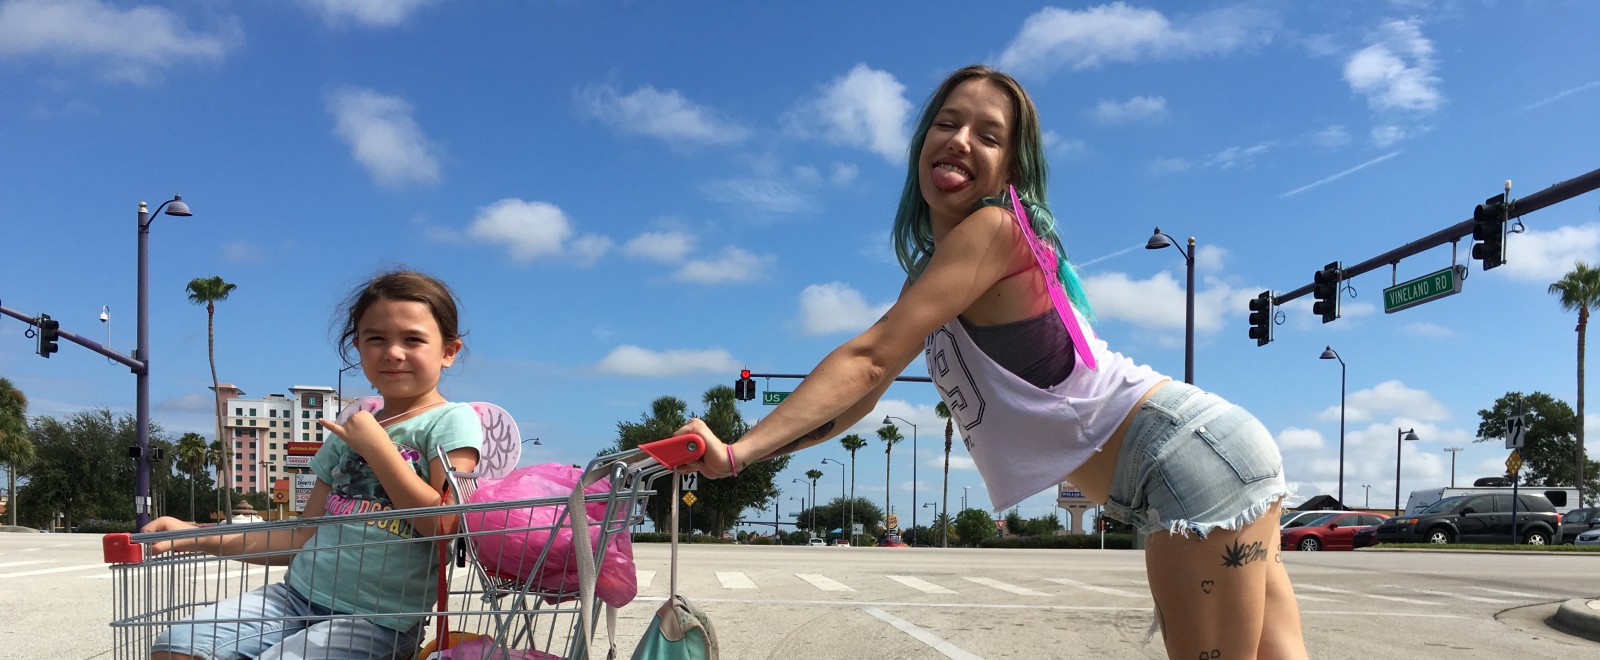 THE FLORIDA PROJECT trailer